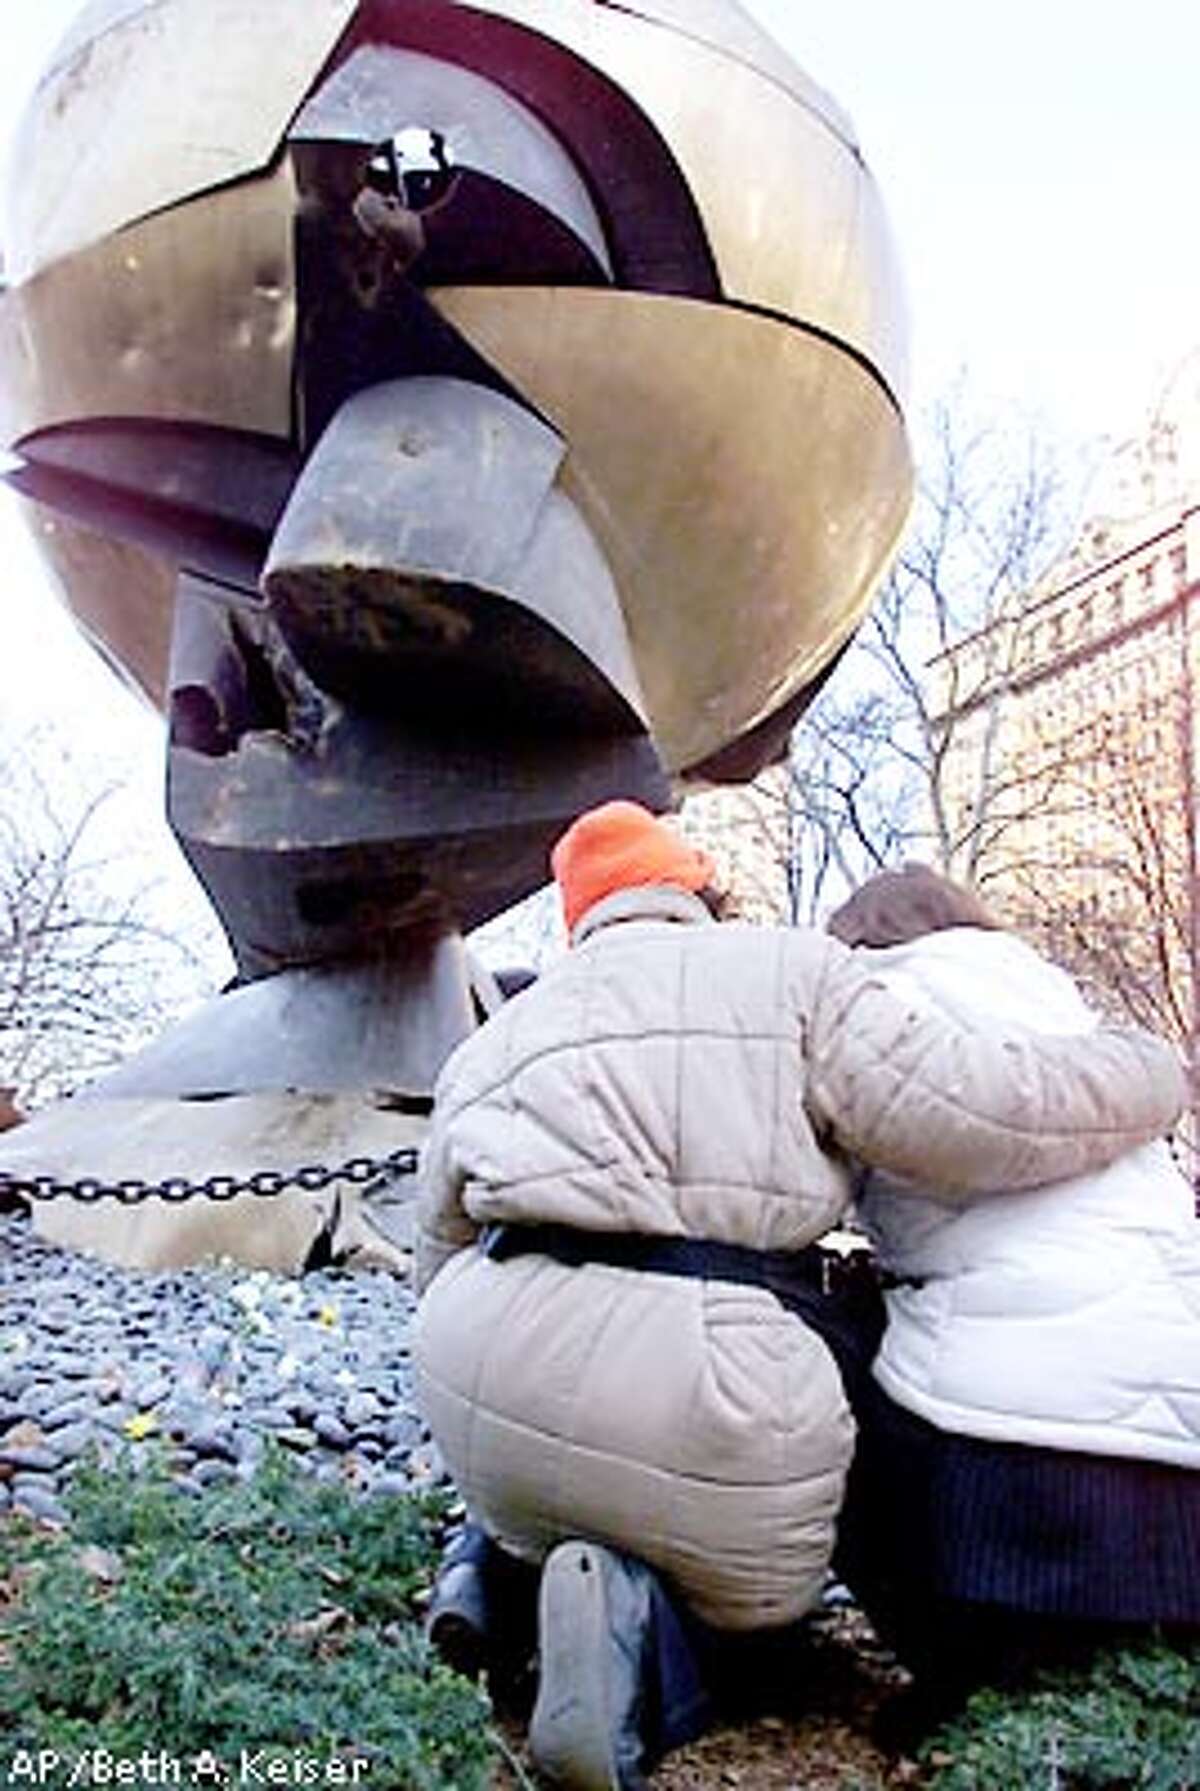 Carmen Valazguez, left, of the Red Cross comforts Jahada Slim, right, who lost a friend in the World Trade Center attacks as they kneel below "The Sphere" Monday, March 11, 2002 in New York. The bronze sculpture, which was a meeting point for workers at the World Trade Center before suffering a deep gash during the Sept. 11 terrorist attacks, was dedicated in a ceremony as a temporary memorial to the victims in Battery Park. (AP Photo/Beth A. Keiser)